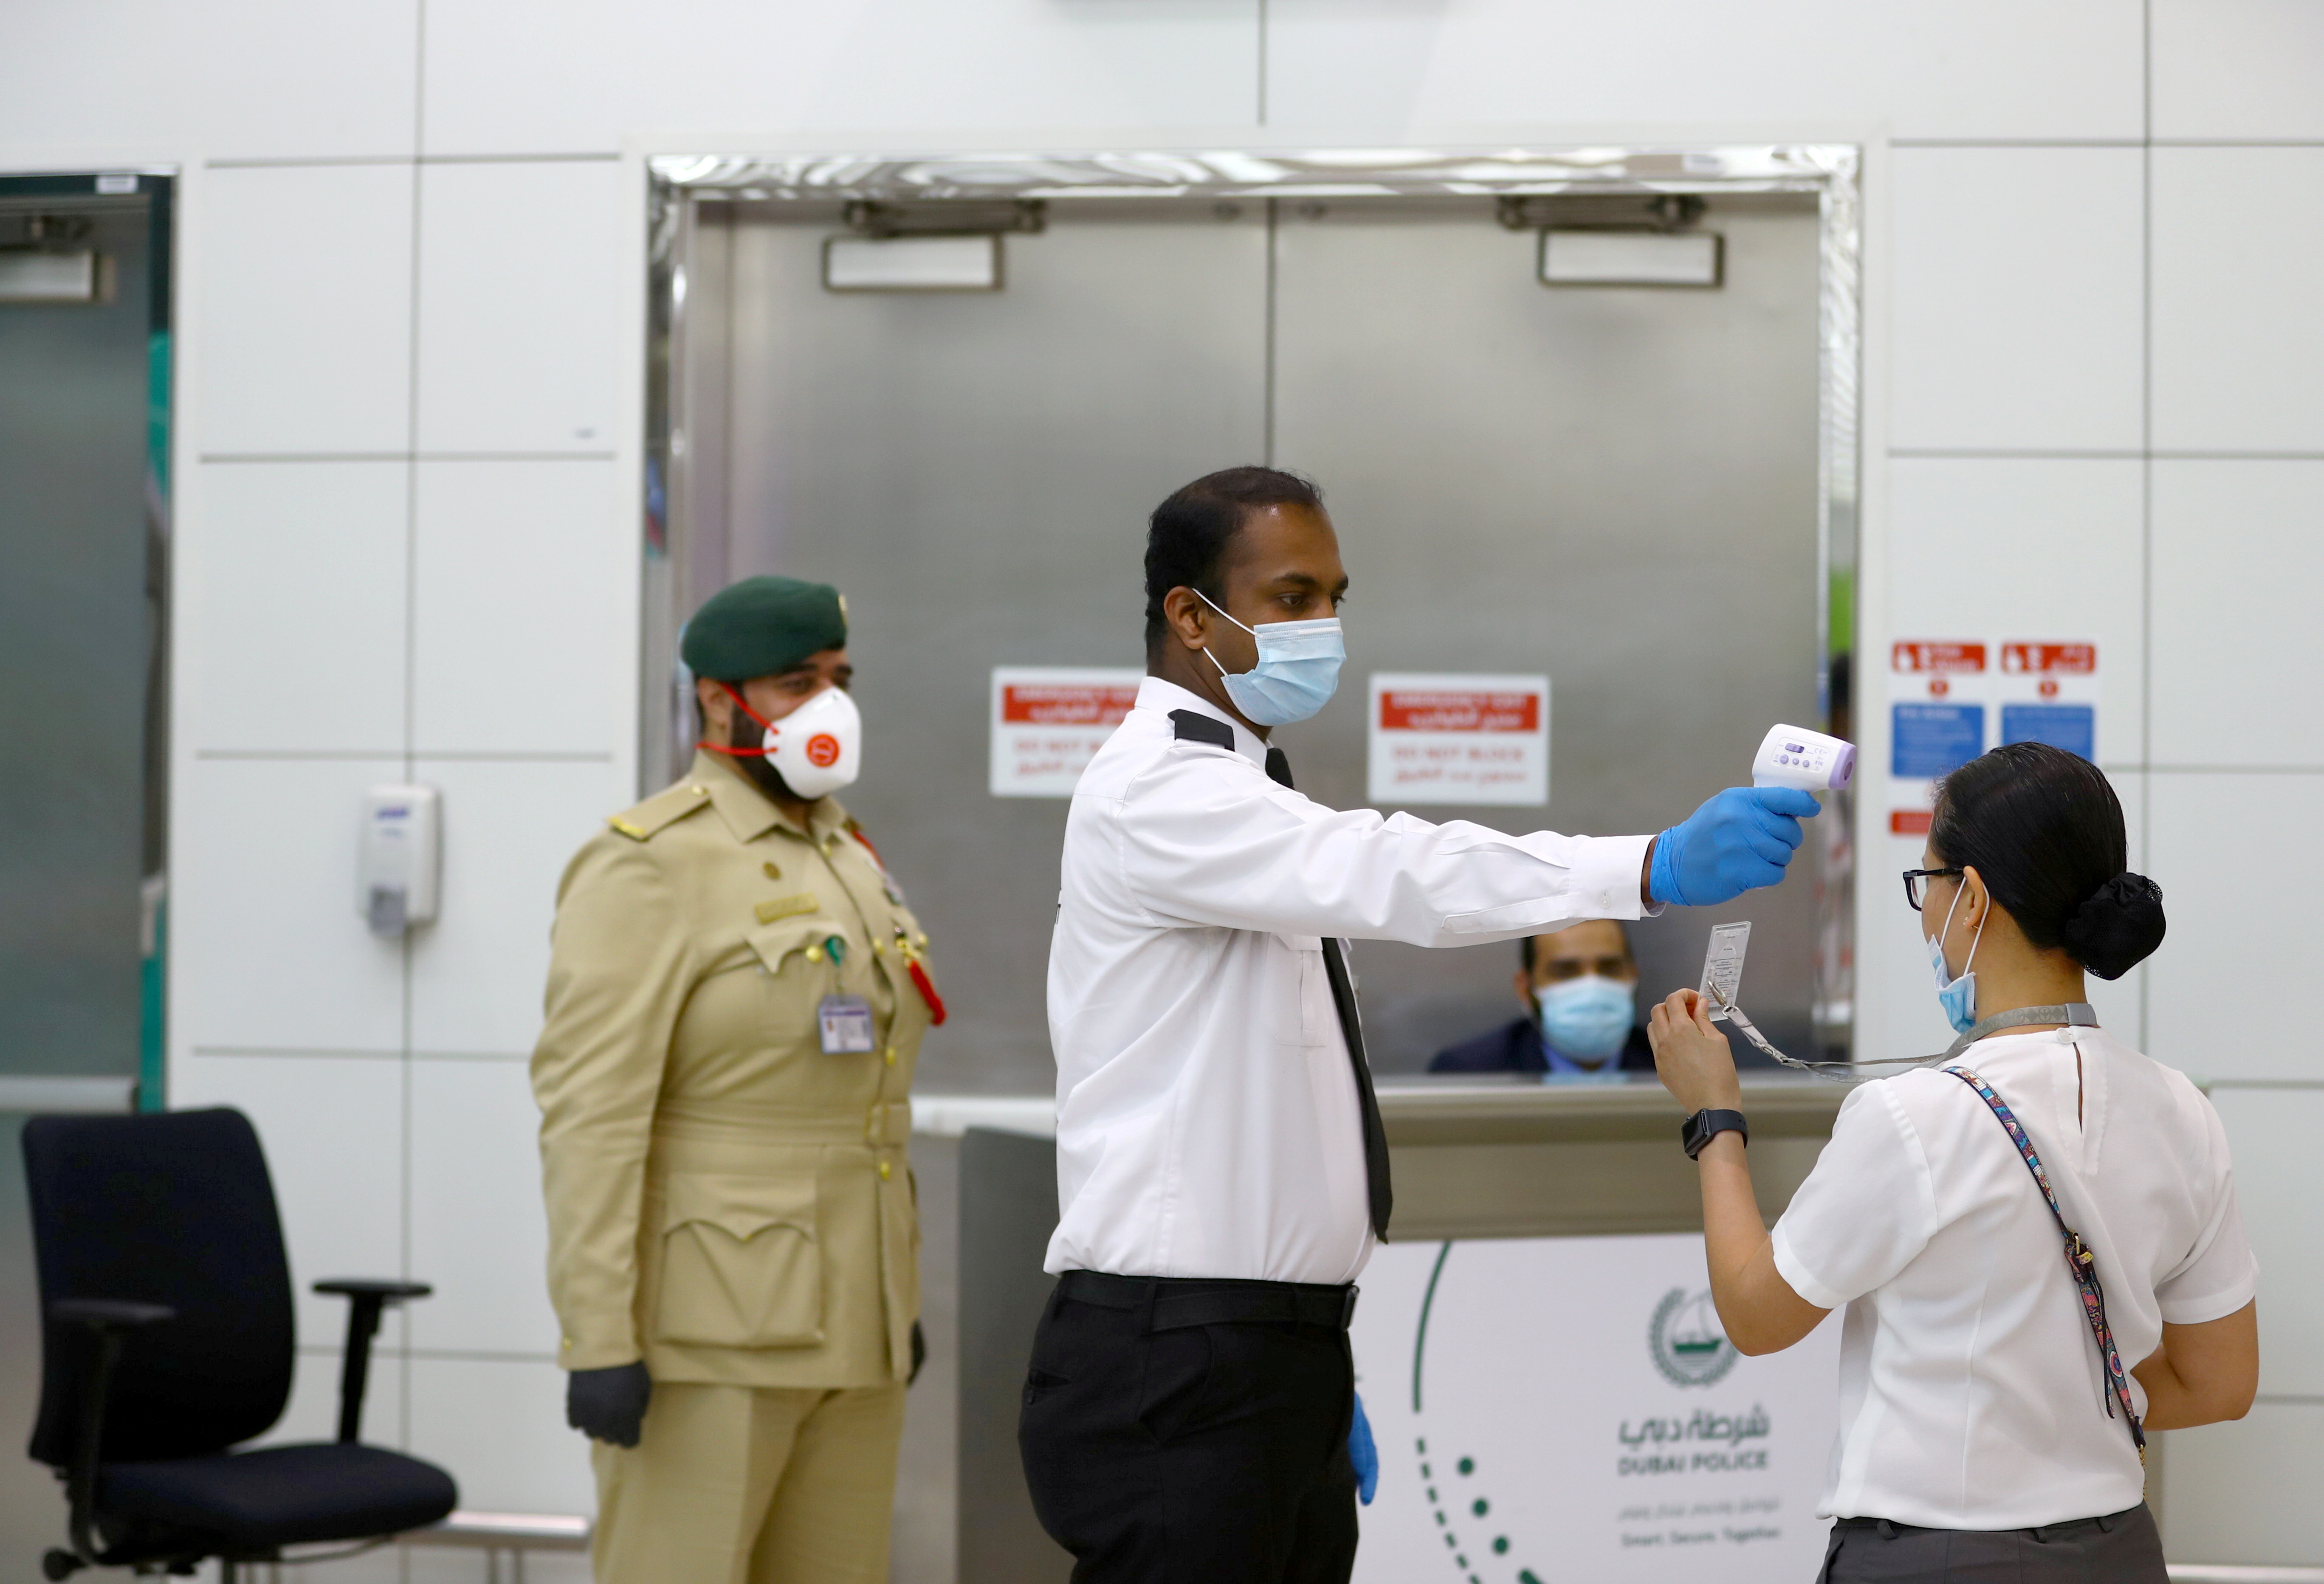 A security man takes temperature of a woman amid the outbreak of the coronavirus disease (COVID-19) at Dubai International Airport